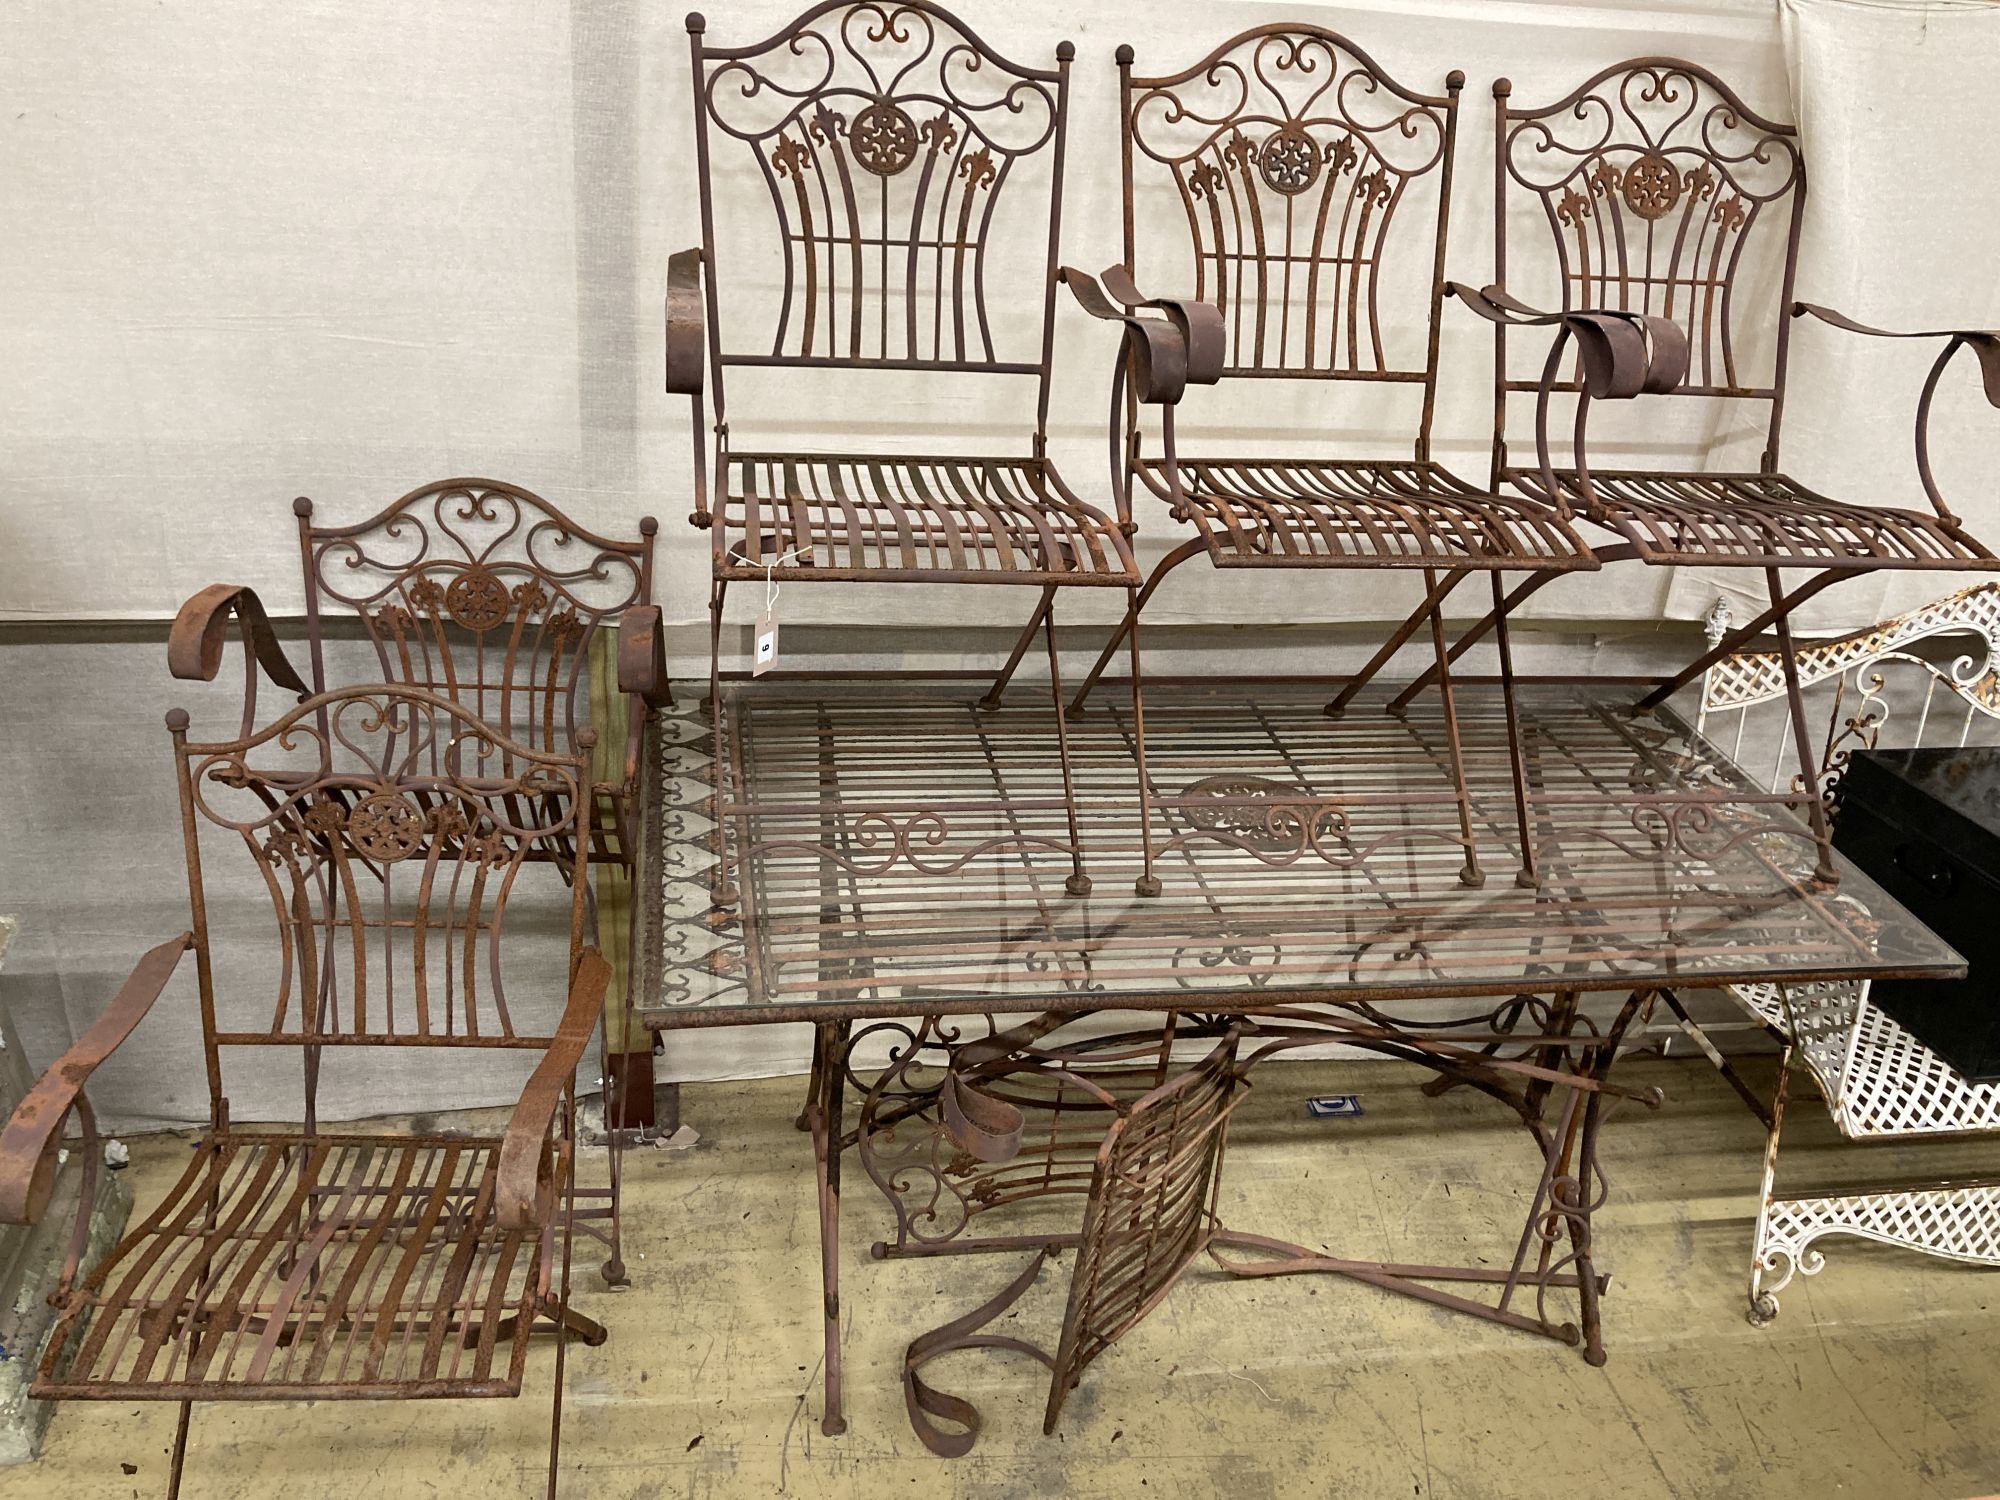 A wrought iron garden table, width 160cm, depth 80cm, height 76cm and six folding chairs